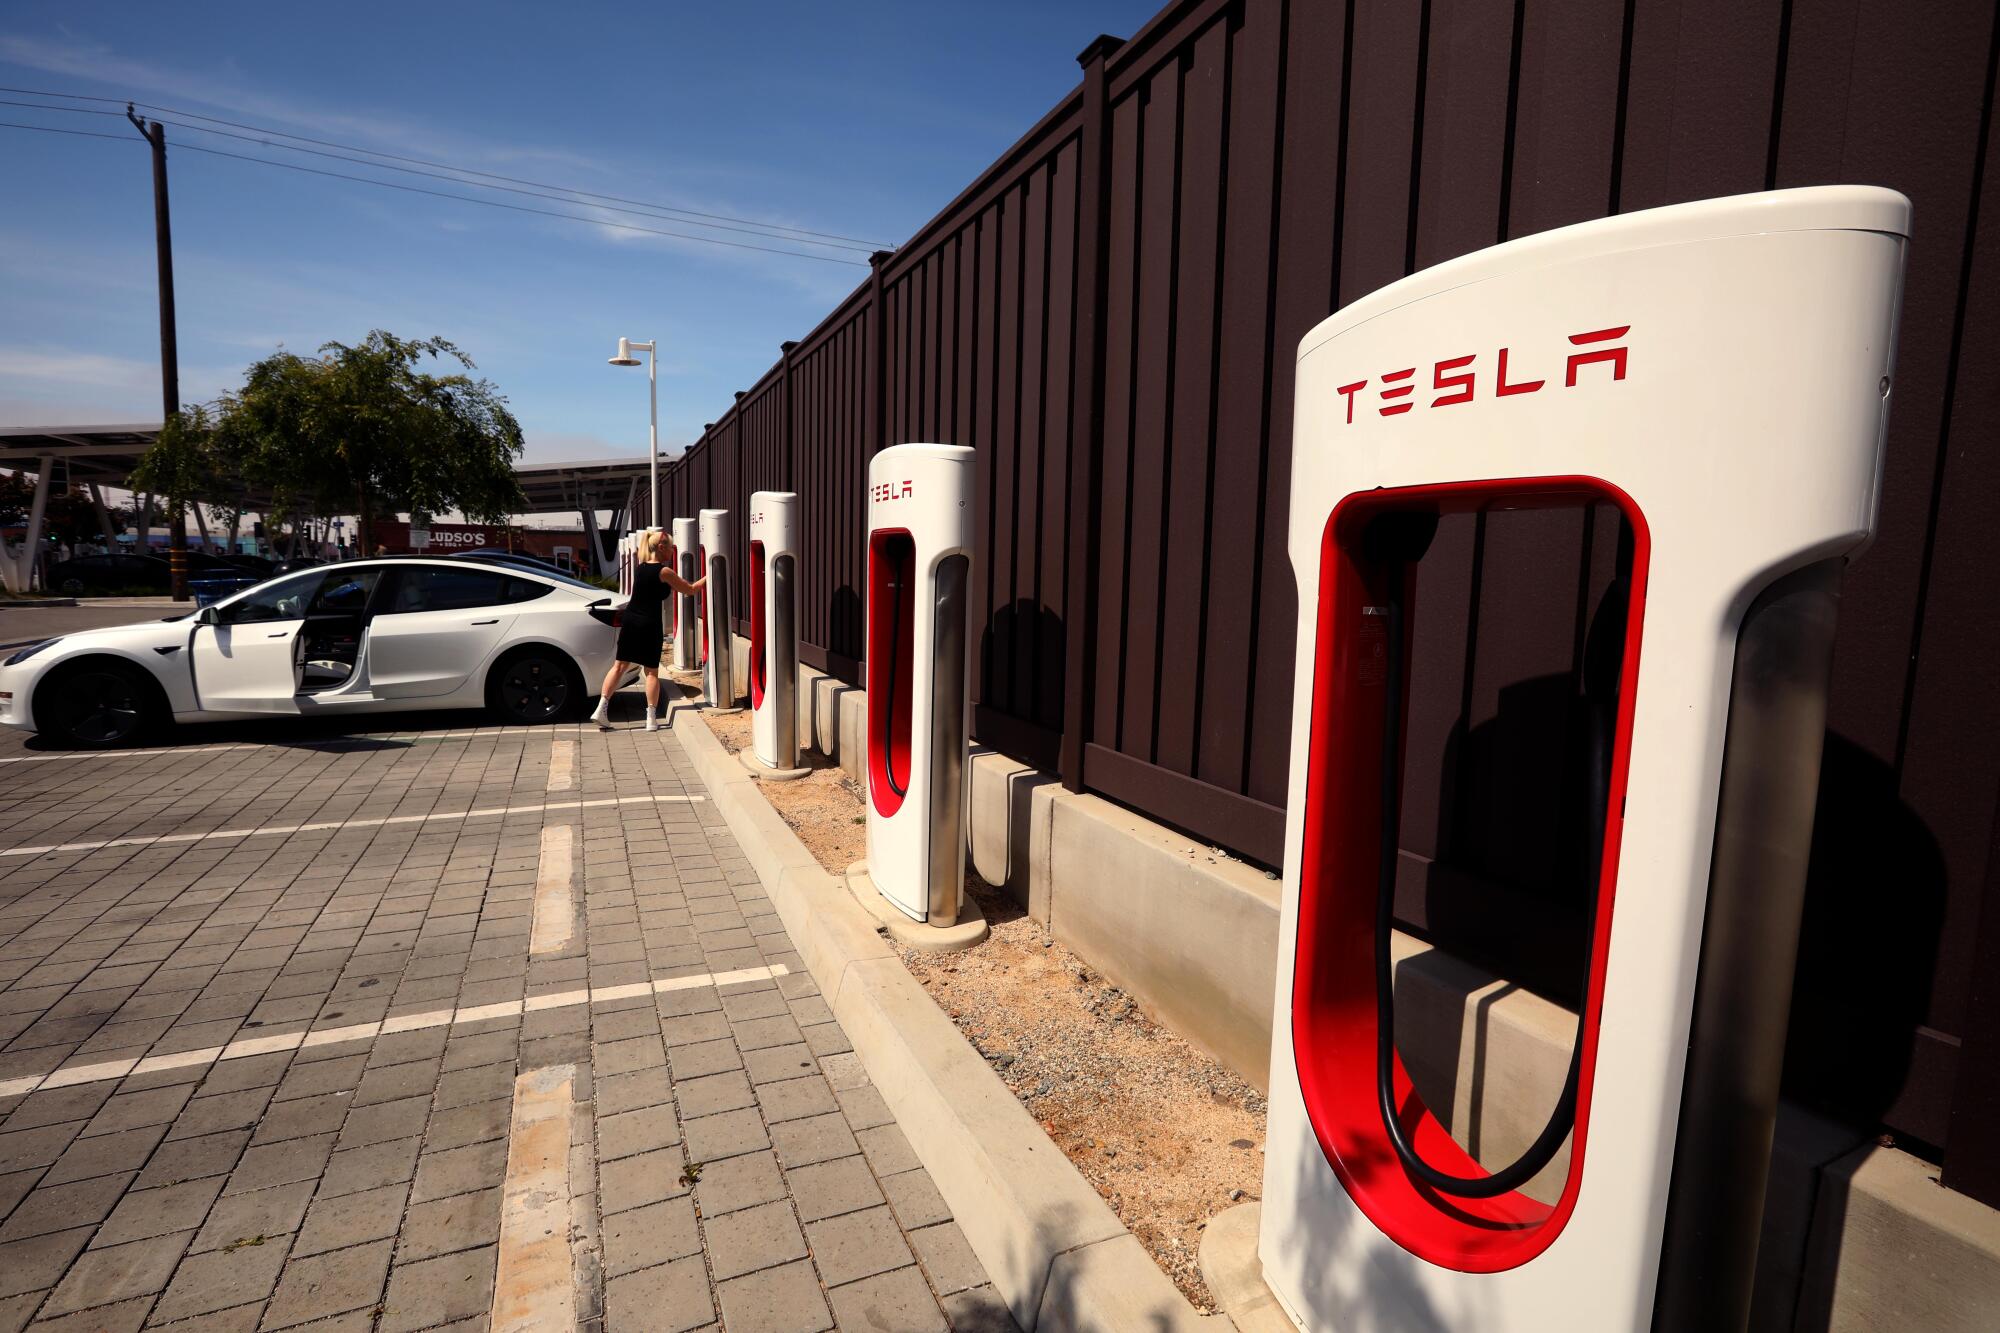 Many Tesla chargers have been compatible with a limited number of other automakers’ vehicles for more than a year.